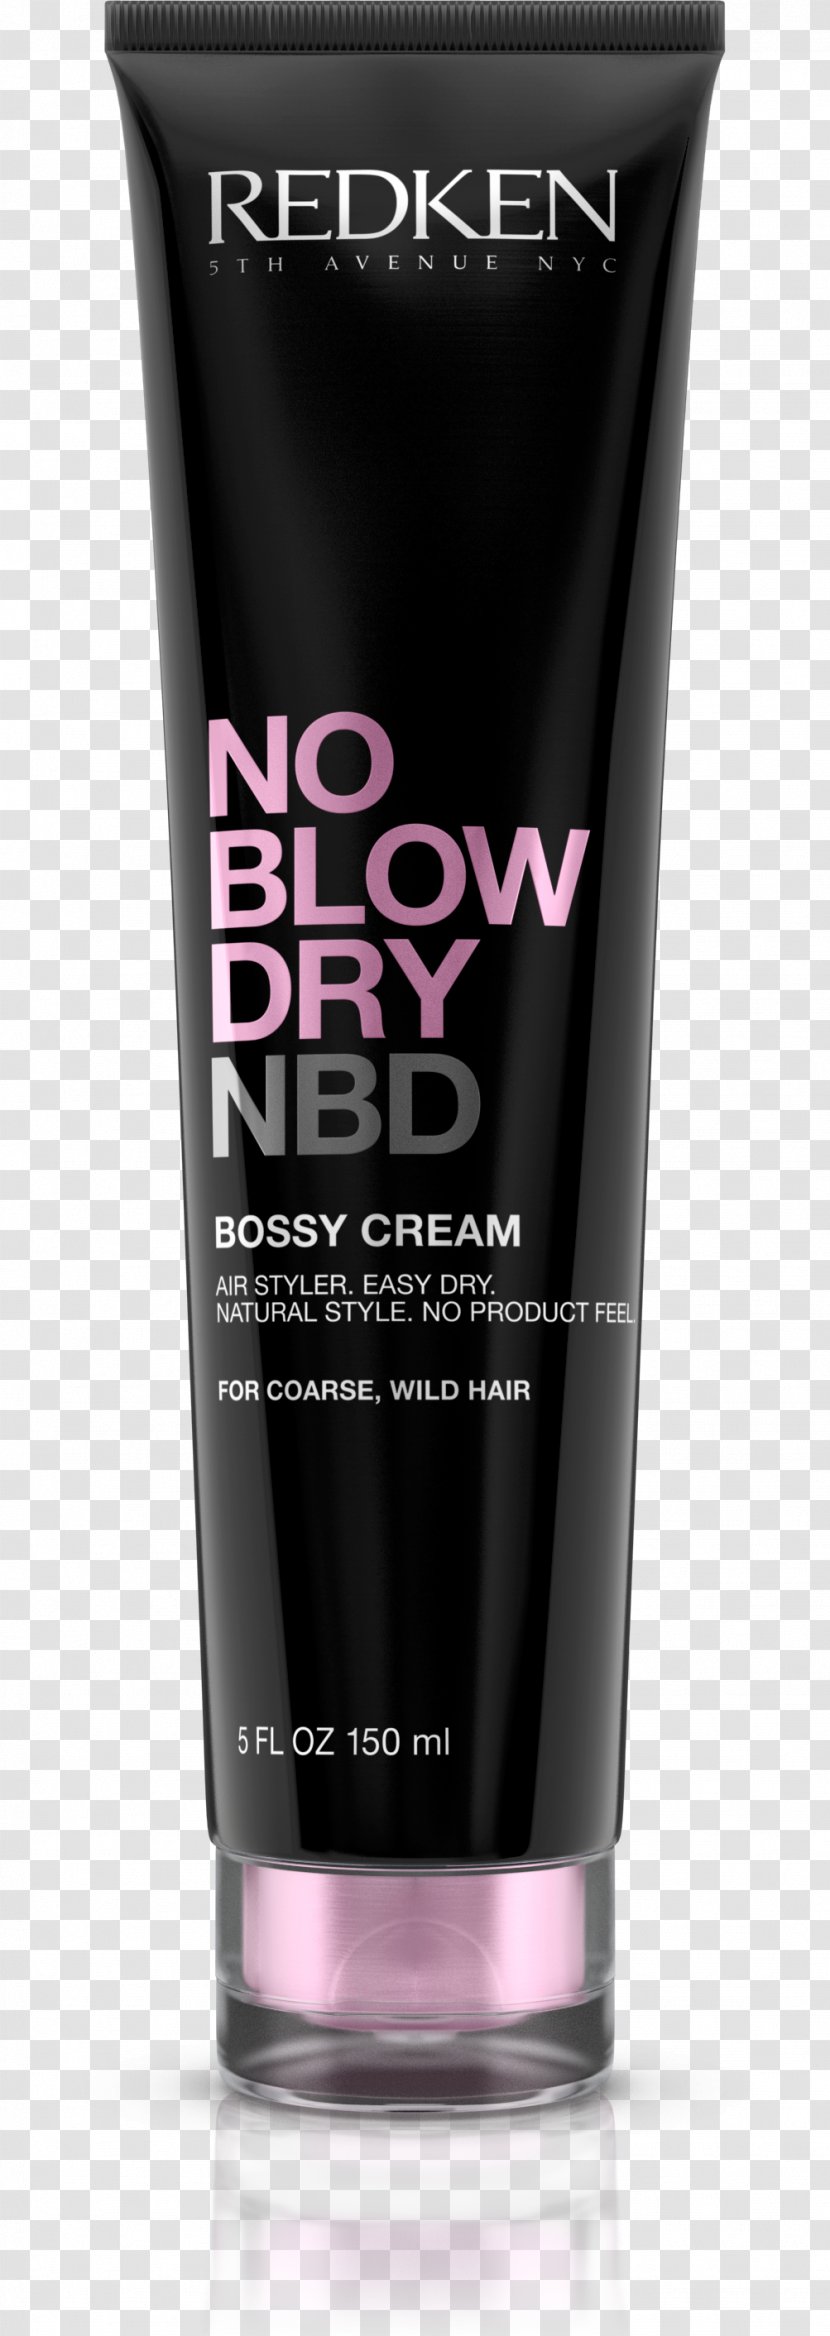 Redken No Blow Dry Airy Cream Bossy Hair Styling Products Care - Liquid Transparent PNG